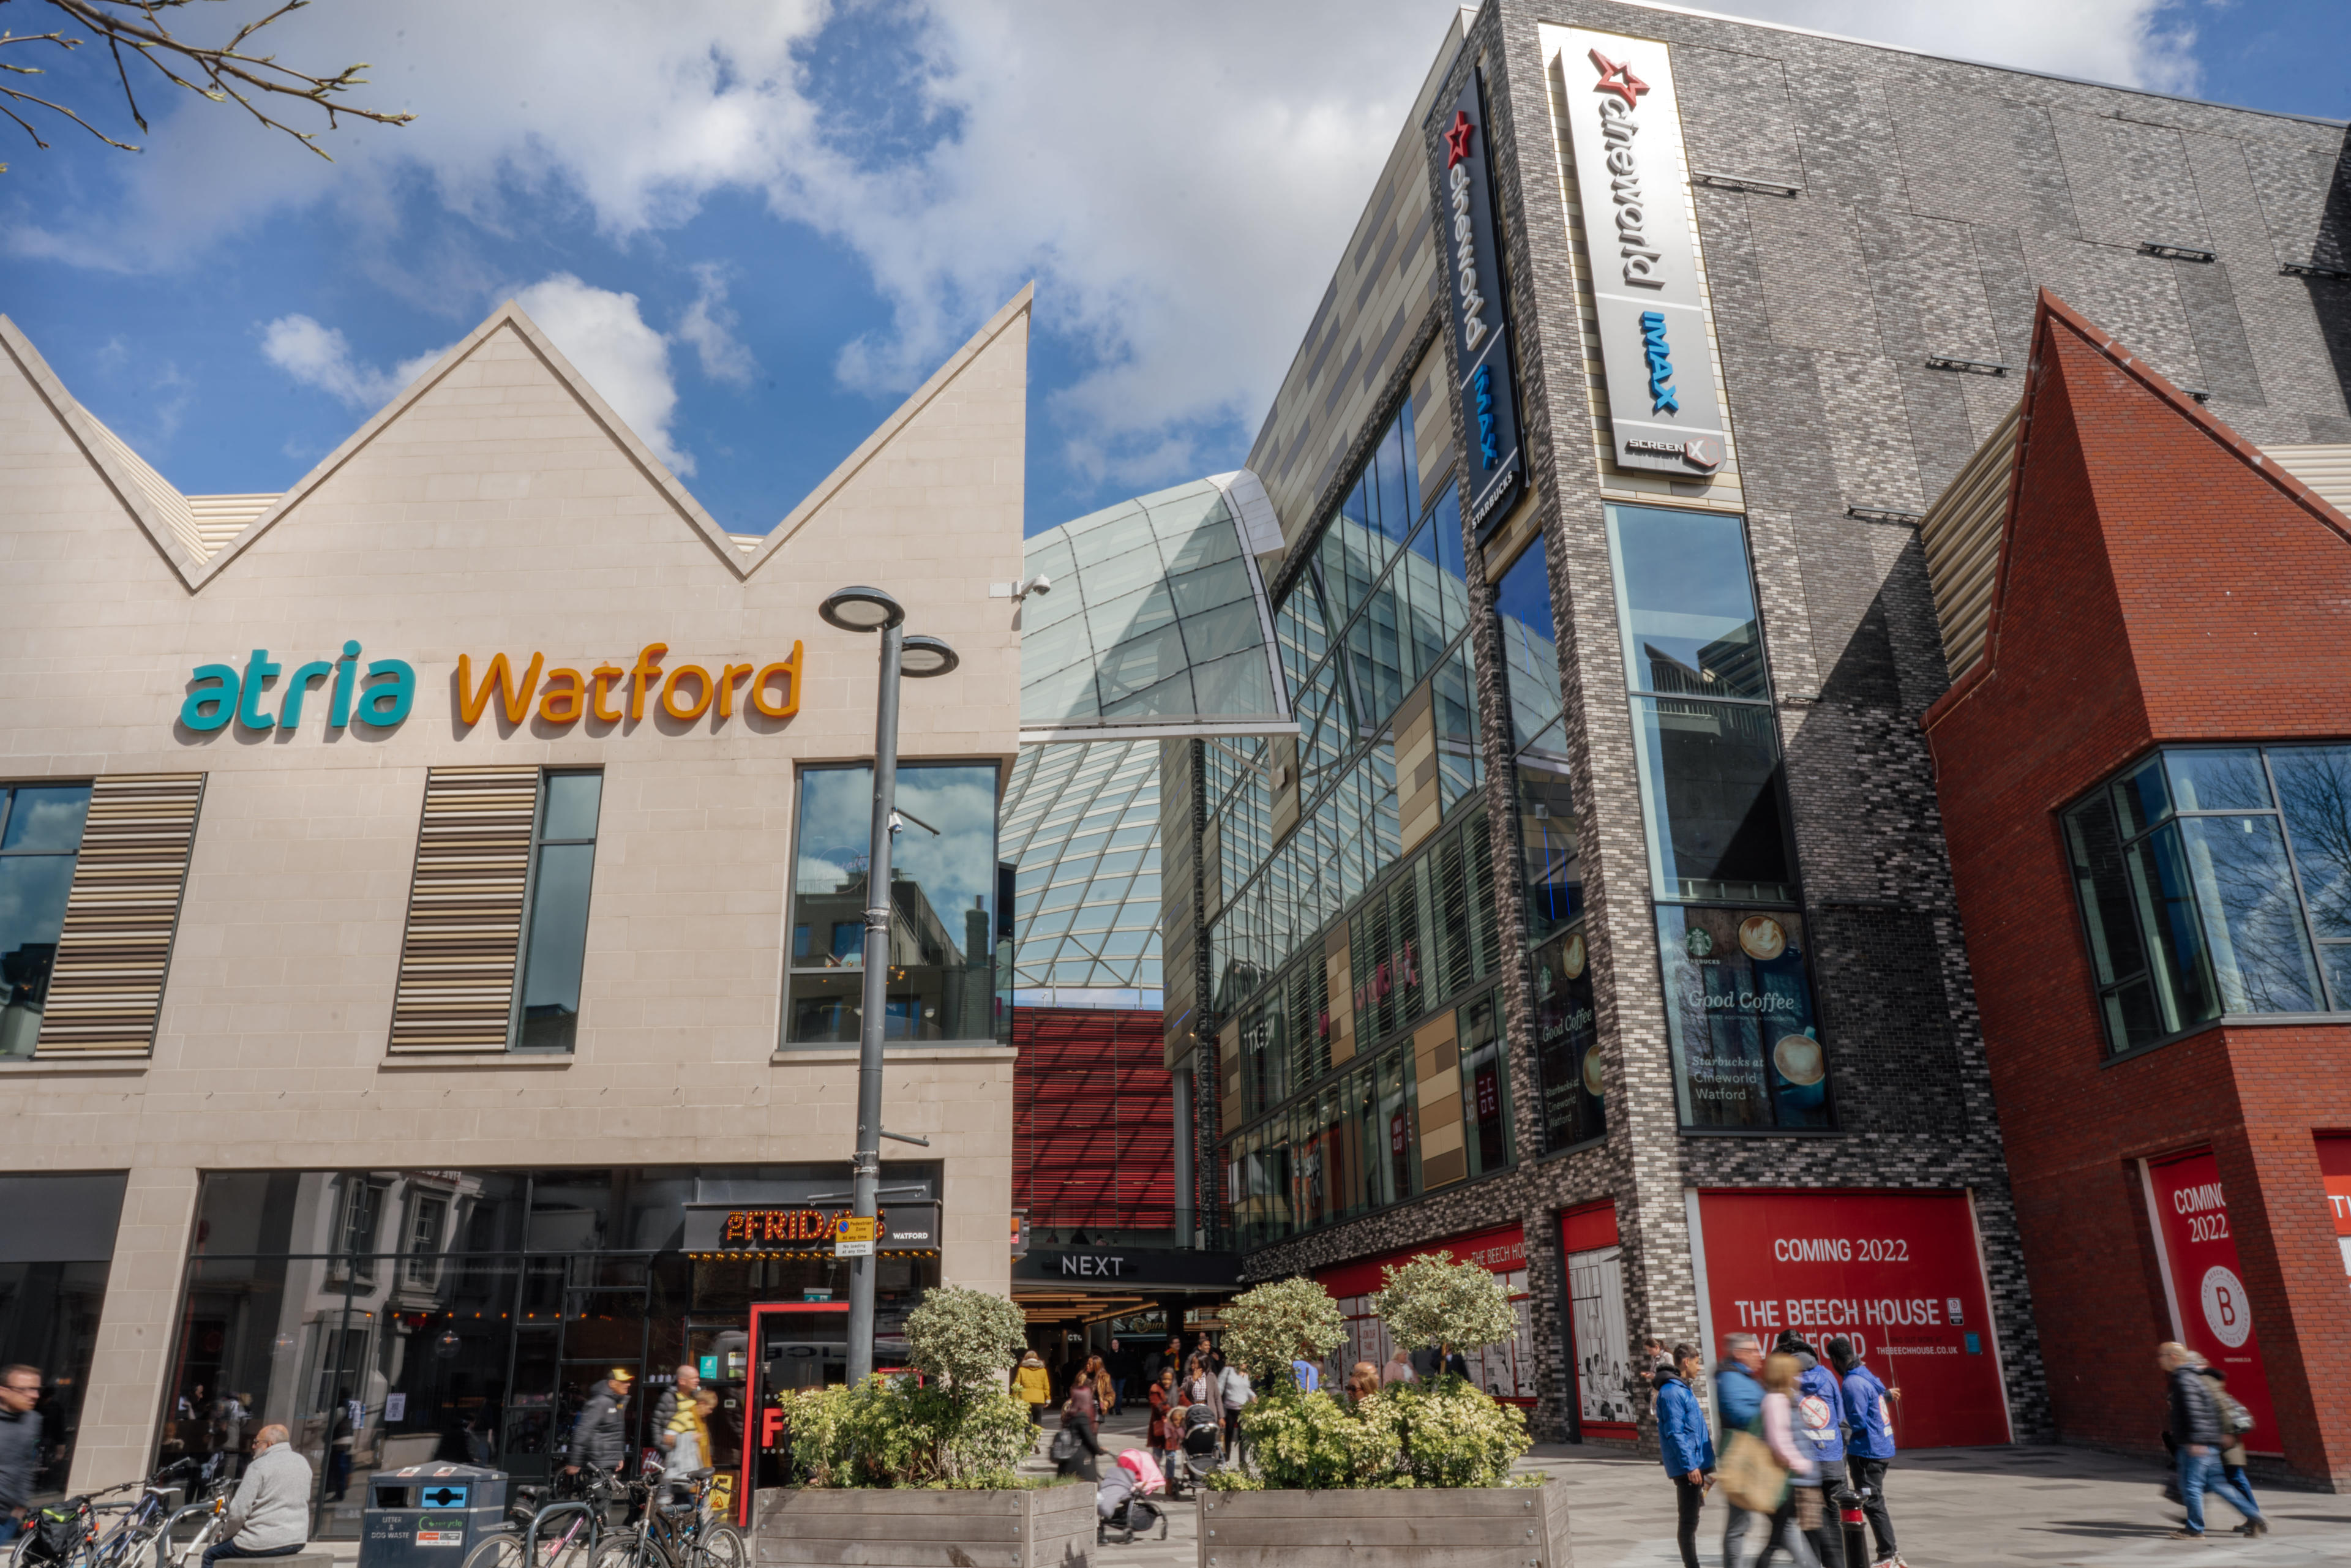 Sign saying "atria Watford" over doors to shopping mall